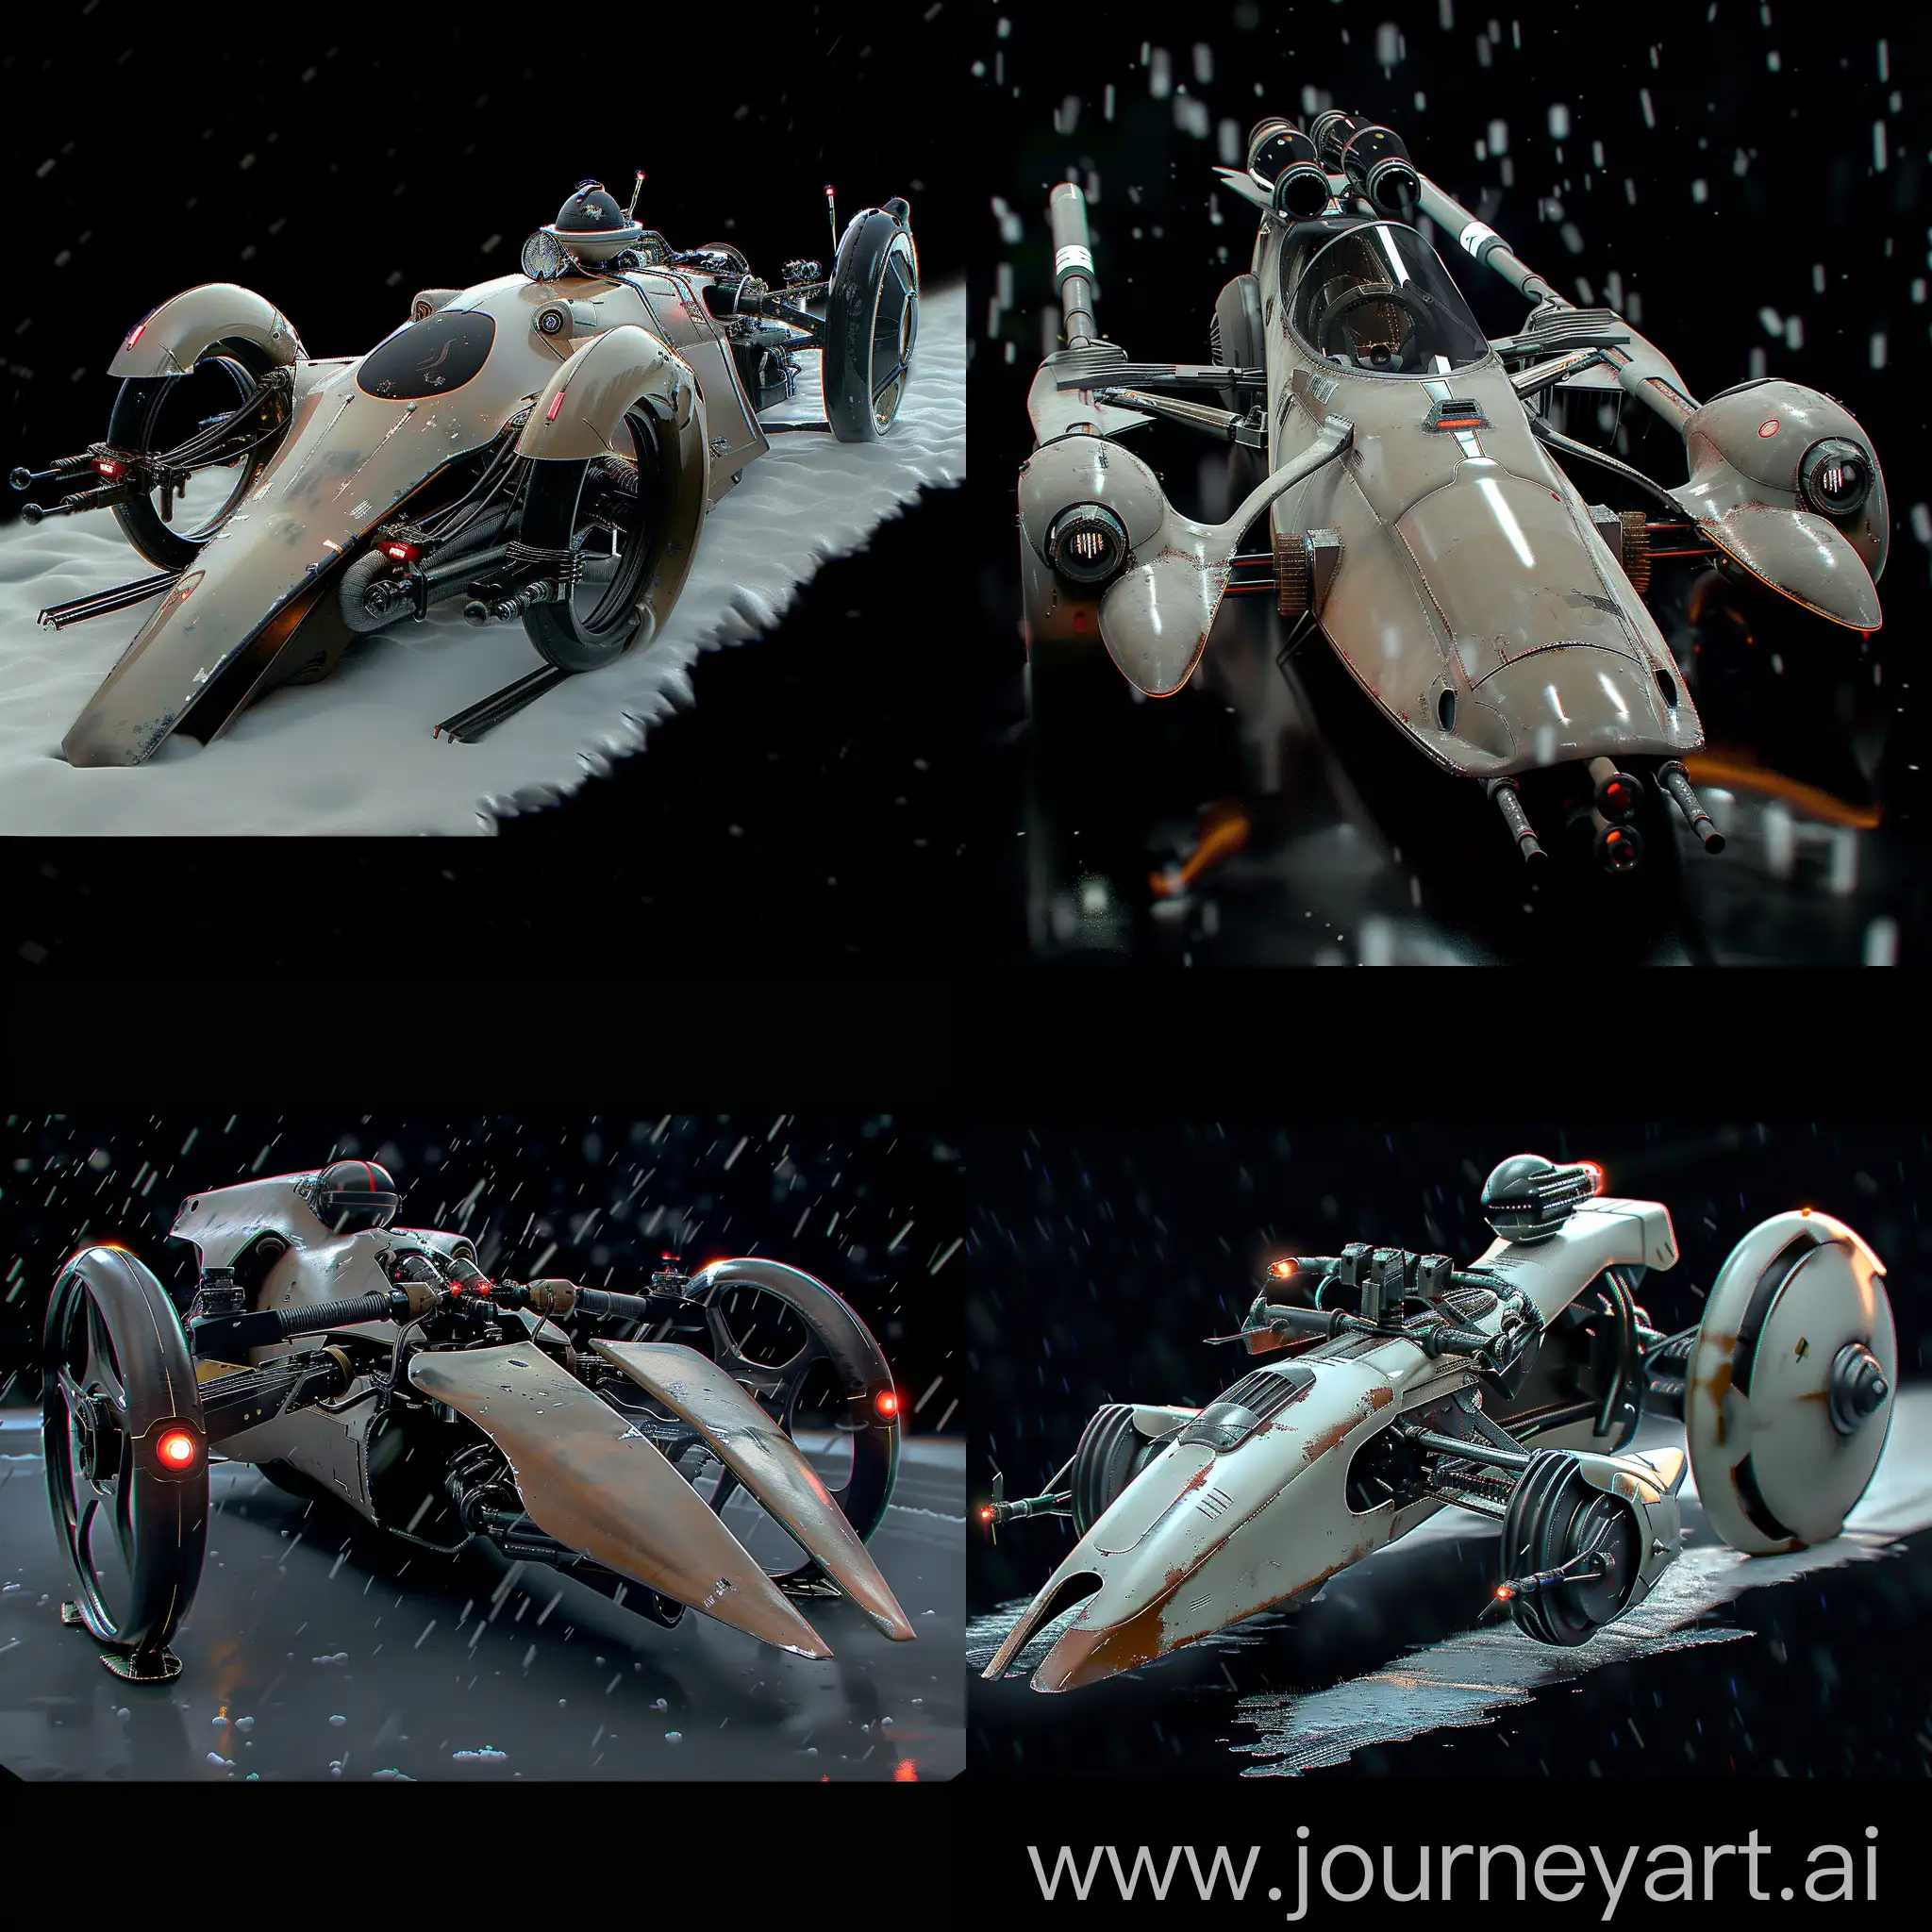 Futuristic Star Wars Speeder bike https://static.wikia.nocookie.net/starwars/images/4/41/74Zspeederboke-TCWBRBD2.png/revision/latest?cb=20131003050004, Electric propulsion, Regenerative braking, Lightweight materials, Aerodynamic design, Energy-efficient lighting, Recycled components, Smart energy management system, Self-charging capabilities, Emission-reducing technology, Eco-friendly paint and finishes, Holographic display, Artificial intelligence integration, Augmented reality windshield, Voice command system, Advanced sensors, Autonomous driving mode, Adaptive suspension system, Energy shield technology, Wireless charging capabilities, Integrated biometric sensors, Droid companion, Multi-functional control panel, Integrated comlink system, Holoprojector, Weapon systems, Stealth mode, Environmental control system, Emergency beacon, Storage compartments, Astromech socket, octane render --stylize 1000